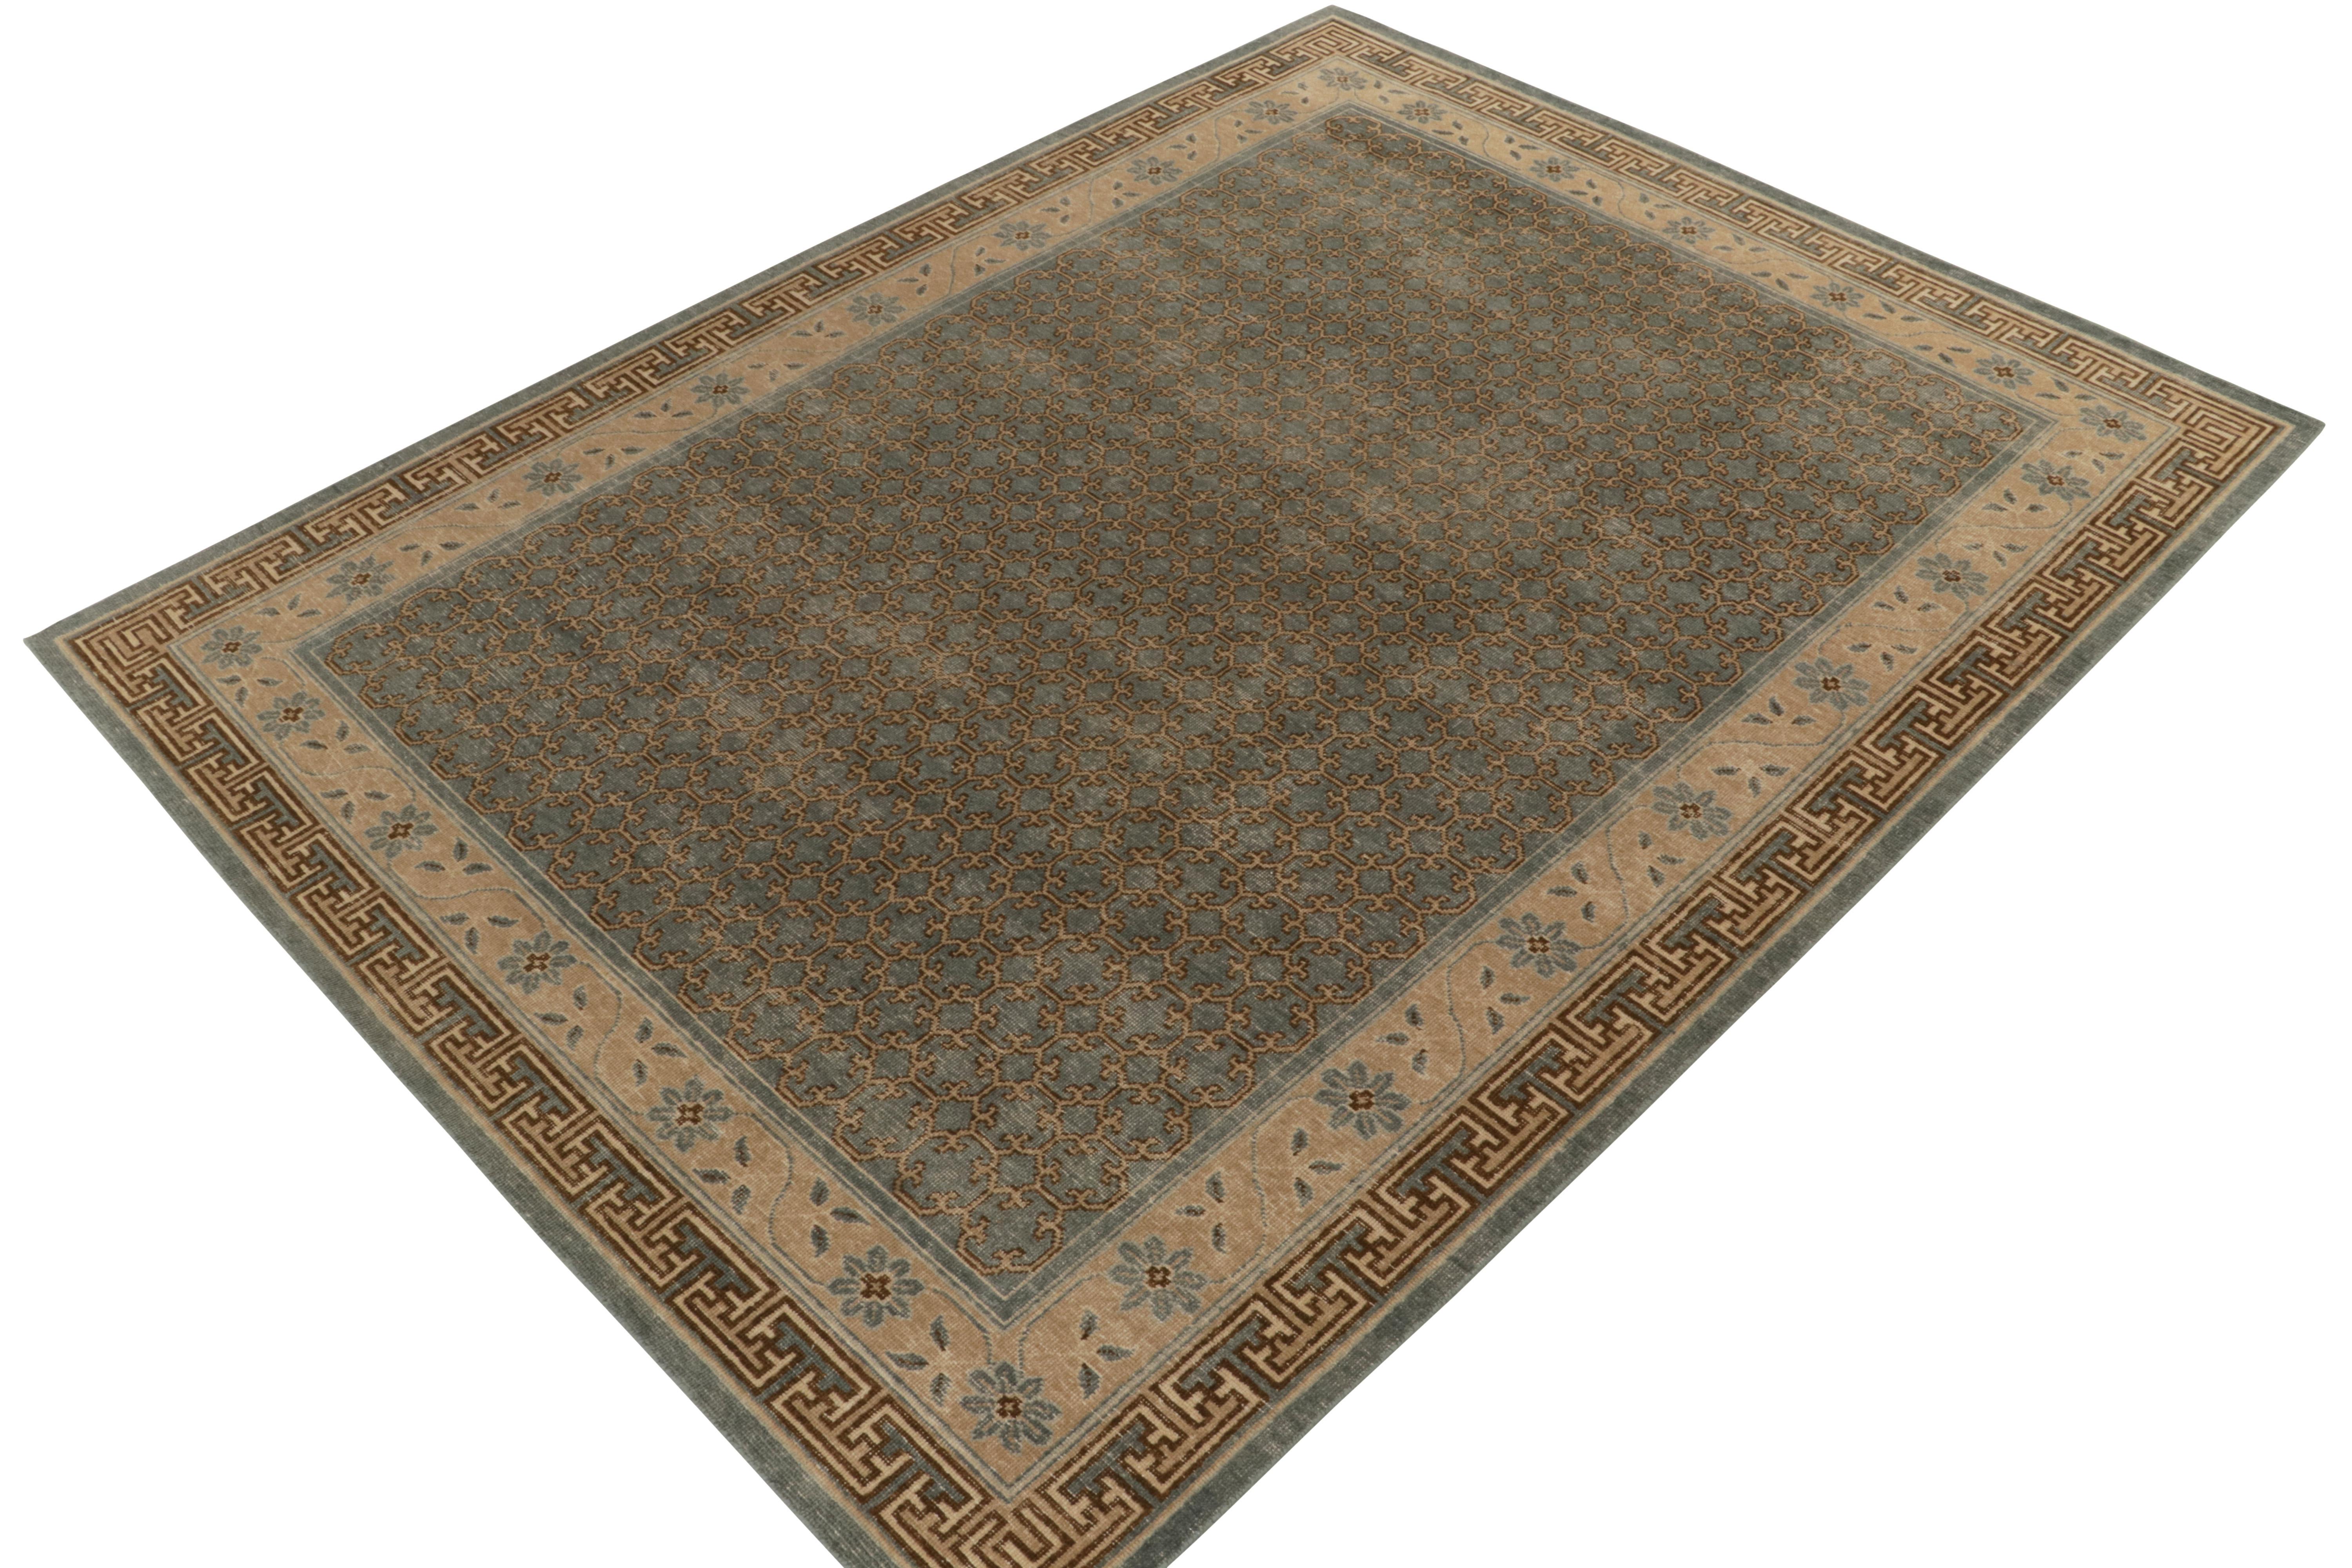 An elegant 9x12 hand-knotted wool rug from Rug & Kilim’s Homage Collection—a bold textural encyclopedia of venerated patterns and styles. 

The classic frame stands inspired by antique Khotan Samarkand rugs of the early 20th century, enjoying a